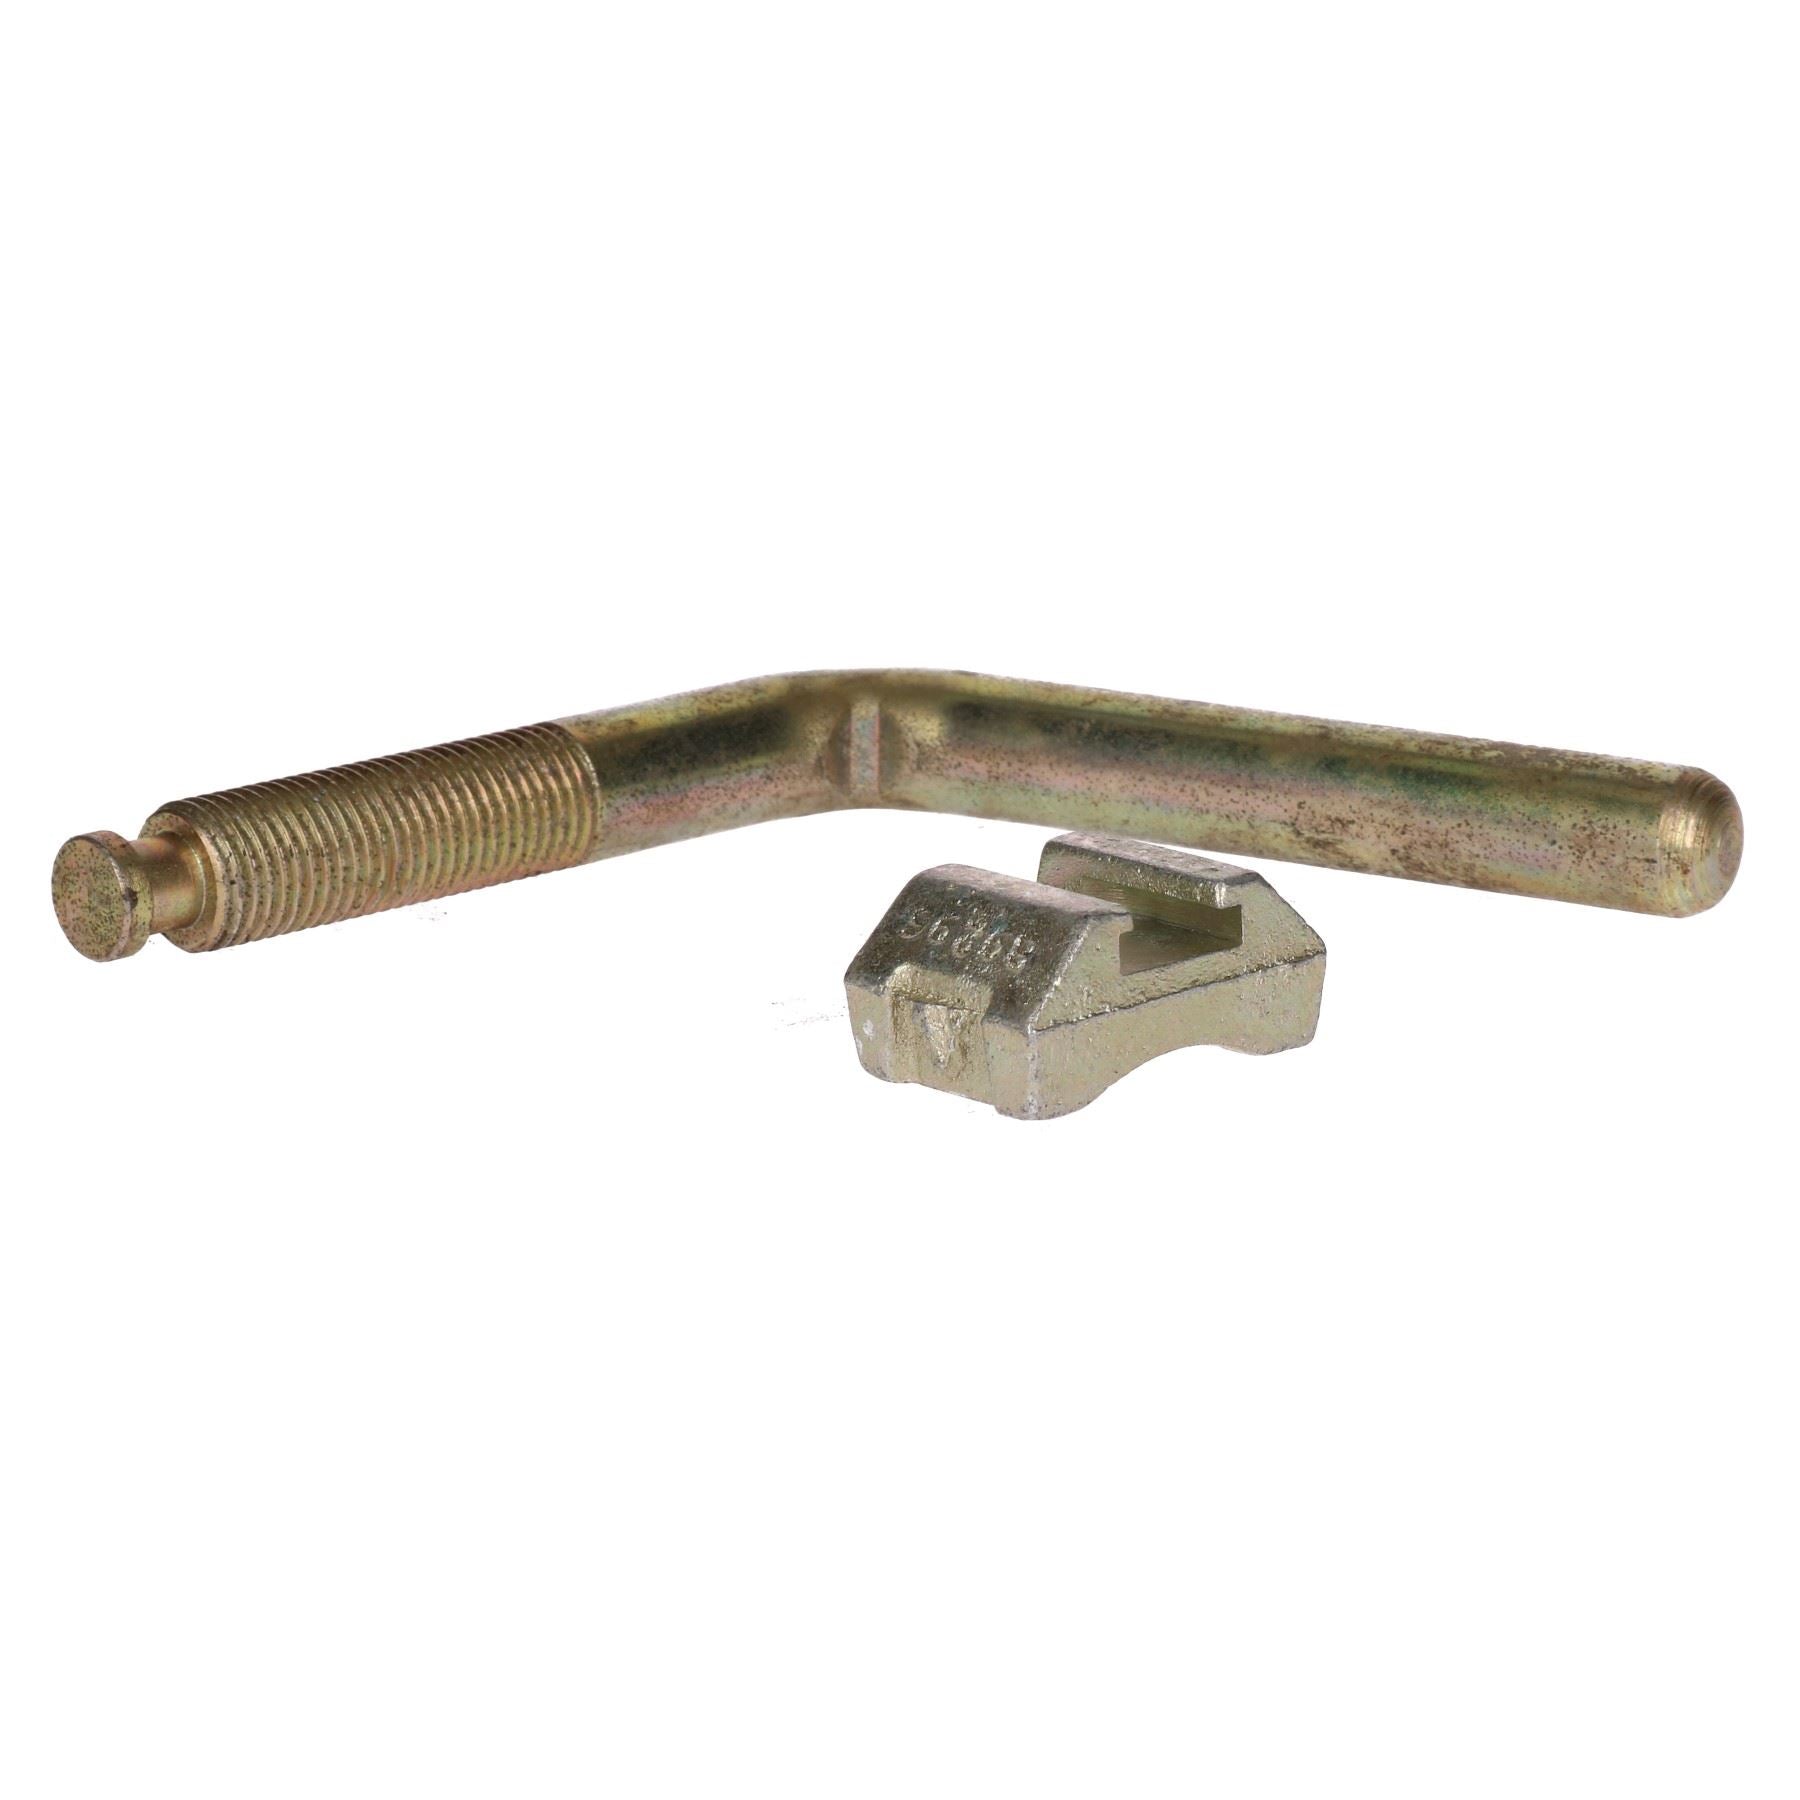 Jockey Wheel Clamp Handle for Indespension Hitchs over 2000kg after 2009